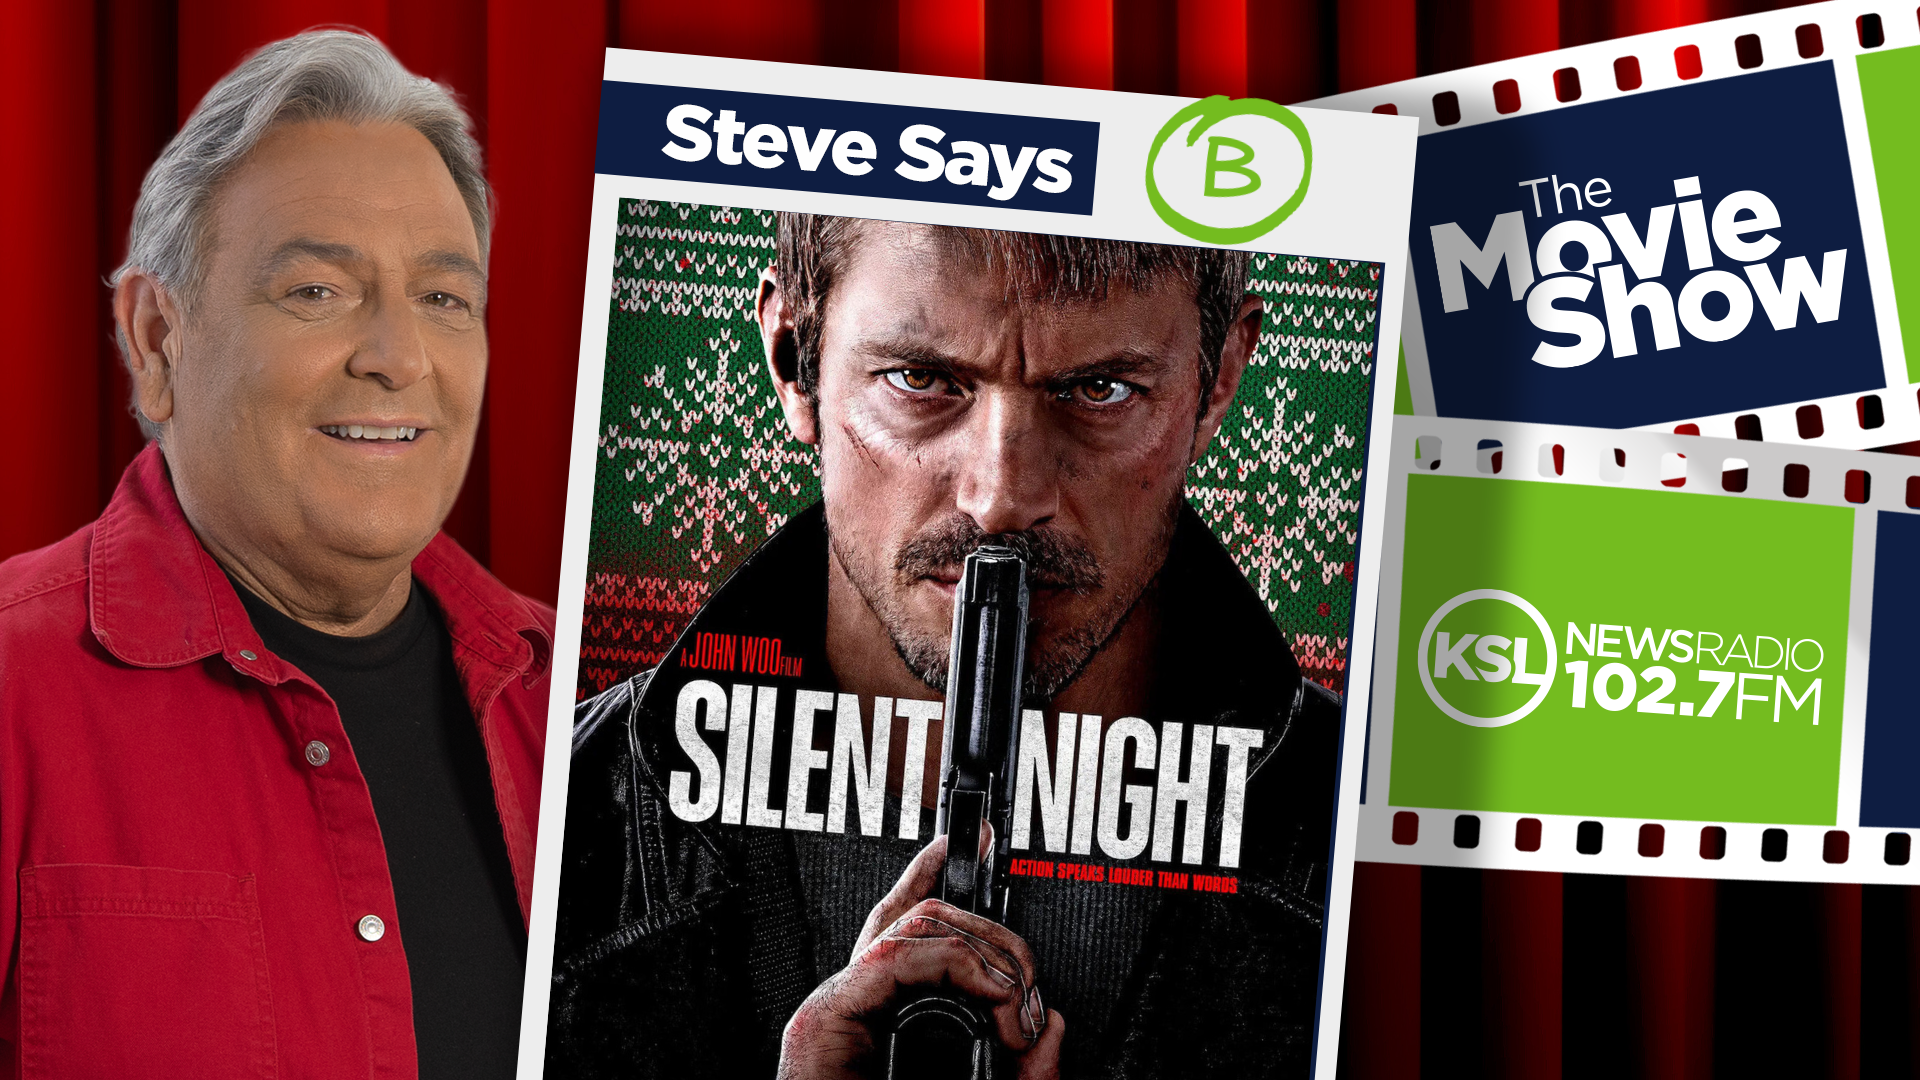 "Silent Night" is a movie about revenge, how it is best served cold, and how words sometimes just g...